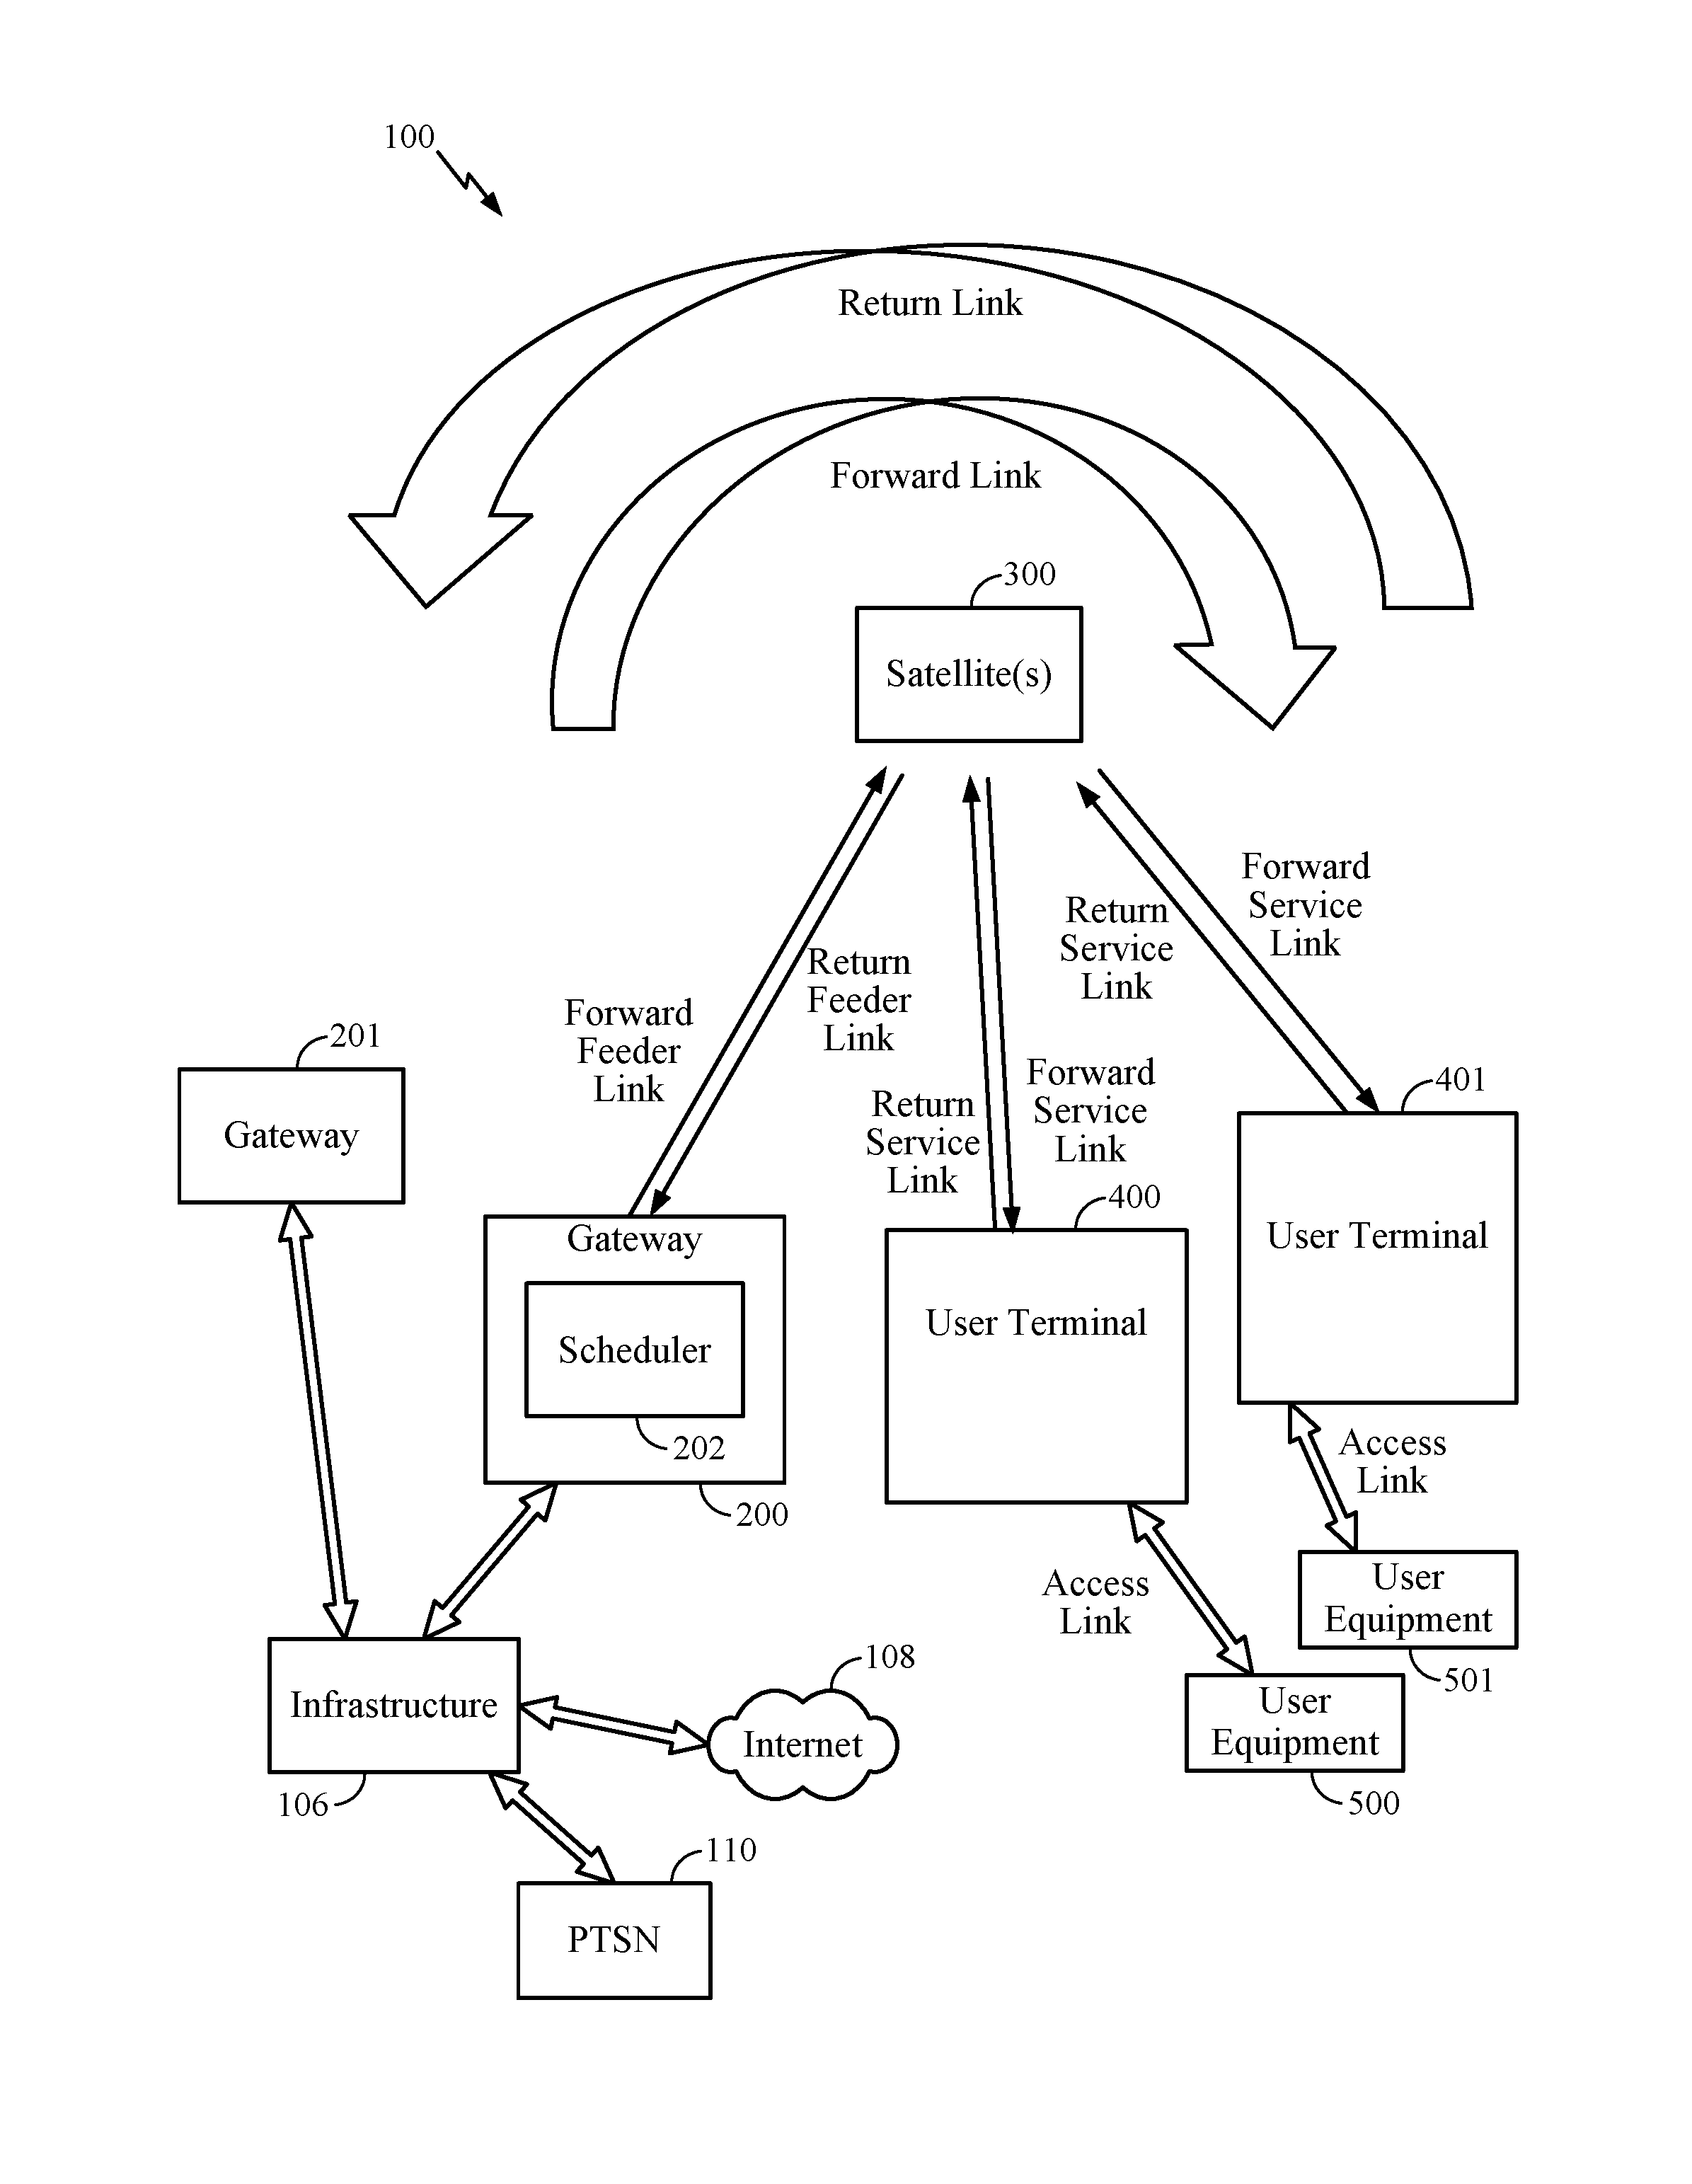 Method and apparatus for efficient data transmissions in half-duplex communication systems with large propagation delays